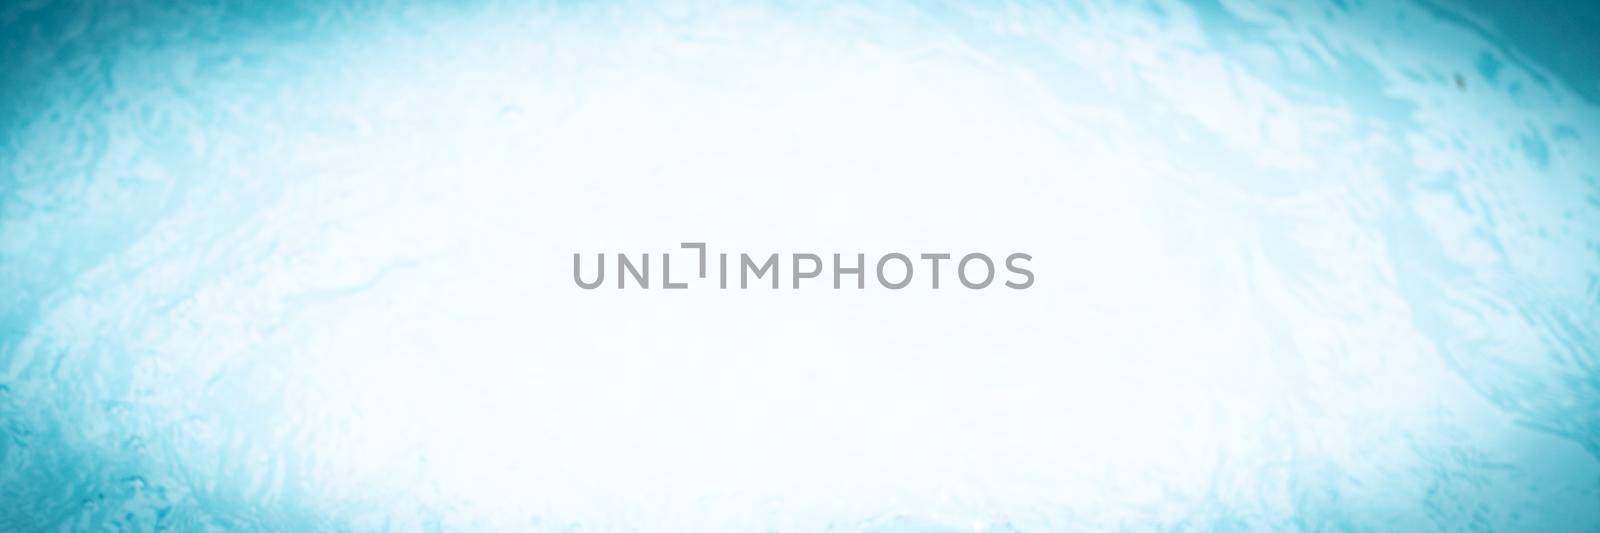 BANNER Vignette Abstract real nature water surface texture copy space soft abstract background view as sky. Turquoise Light white blue colour. Design Romance Relaxation Simplicity Minimalism tint.